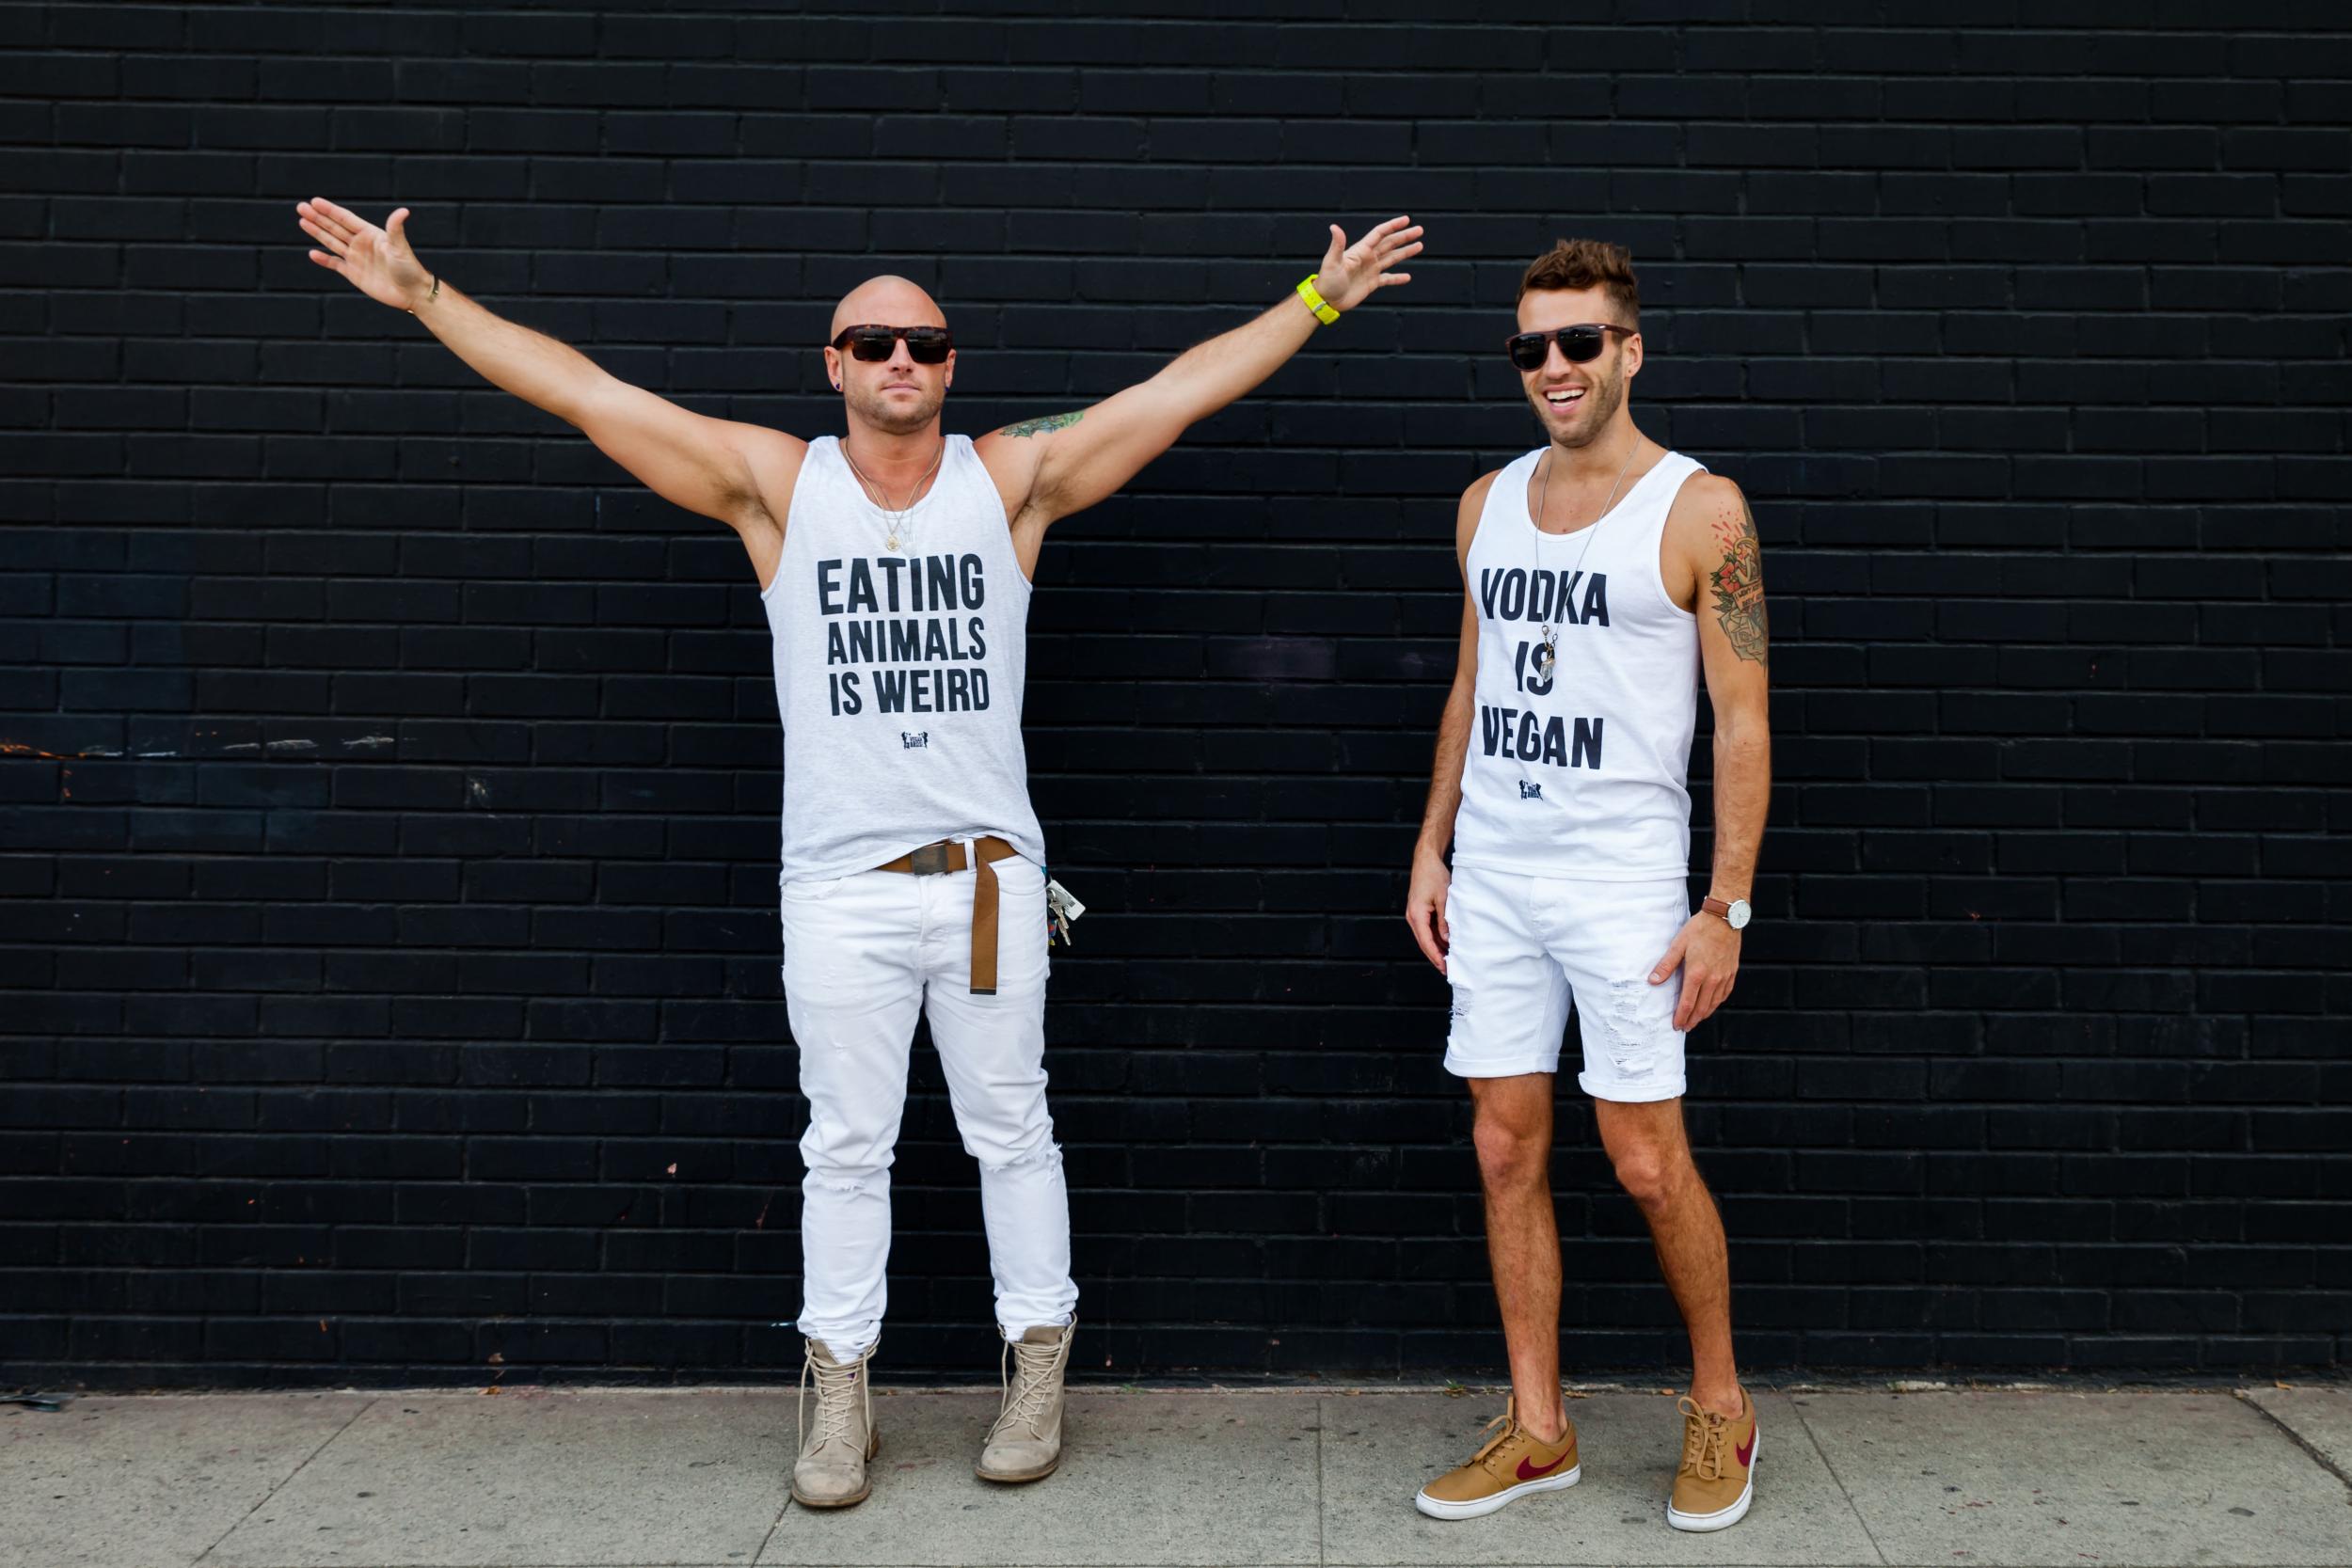 Why not embrace the vegan lifestyle like these guys? You'd even have an excuse because you're saving the planet